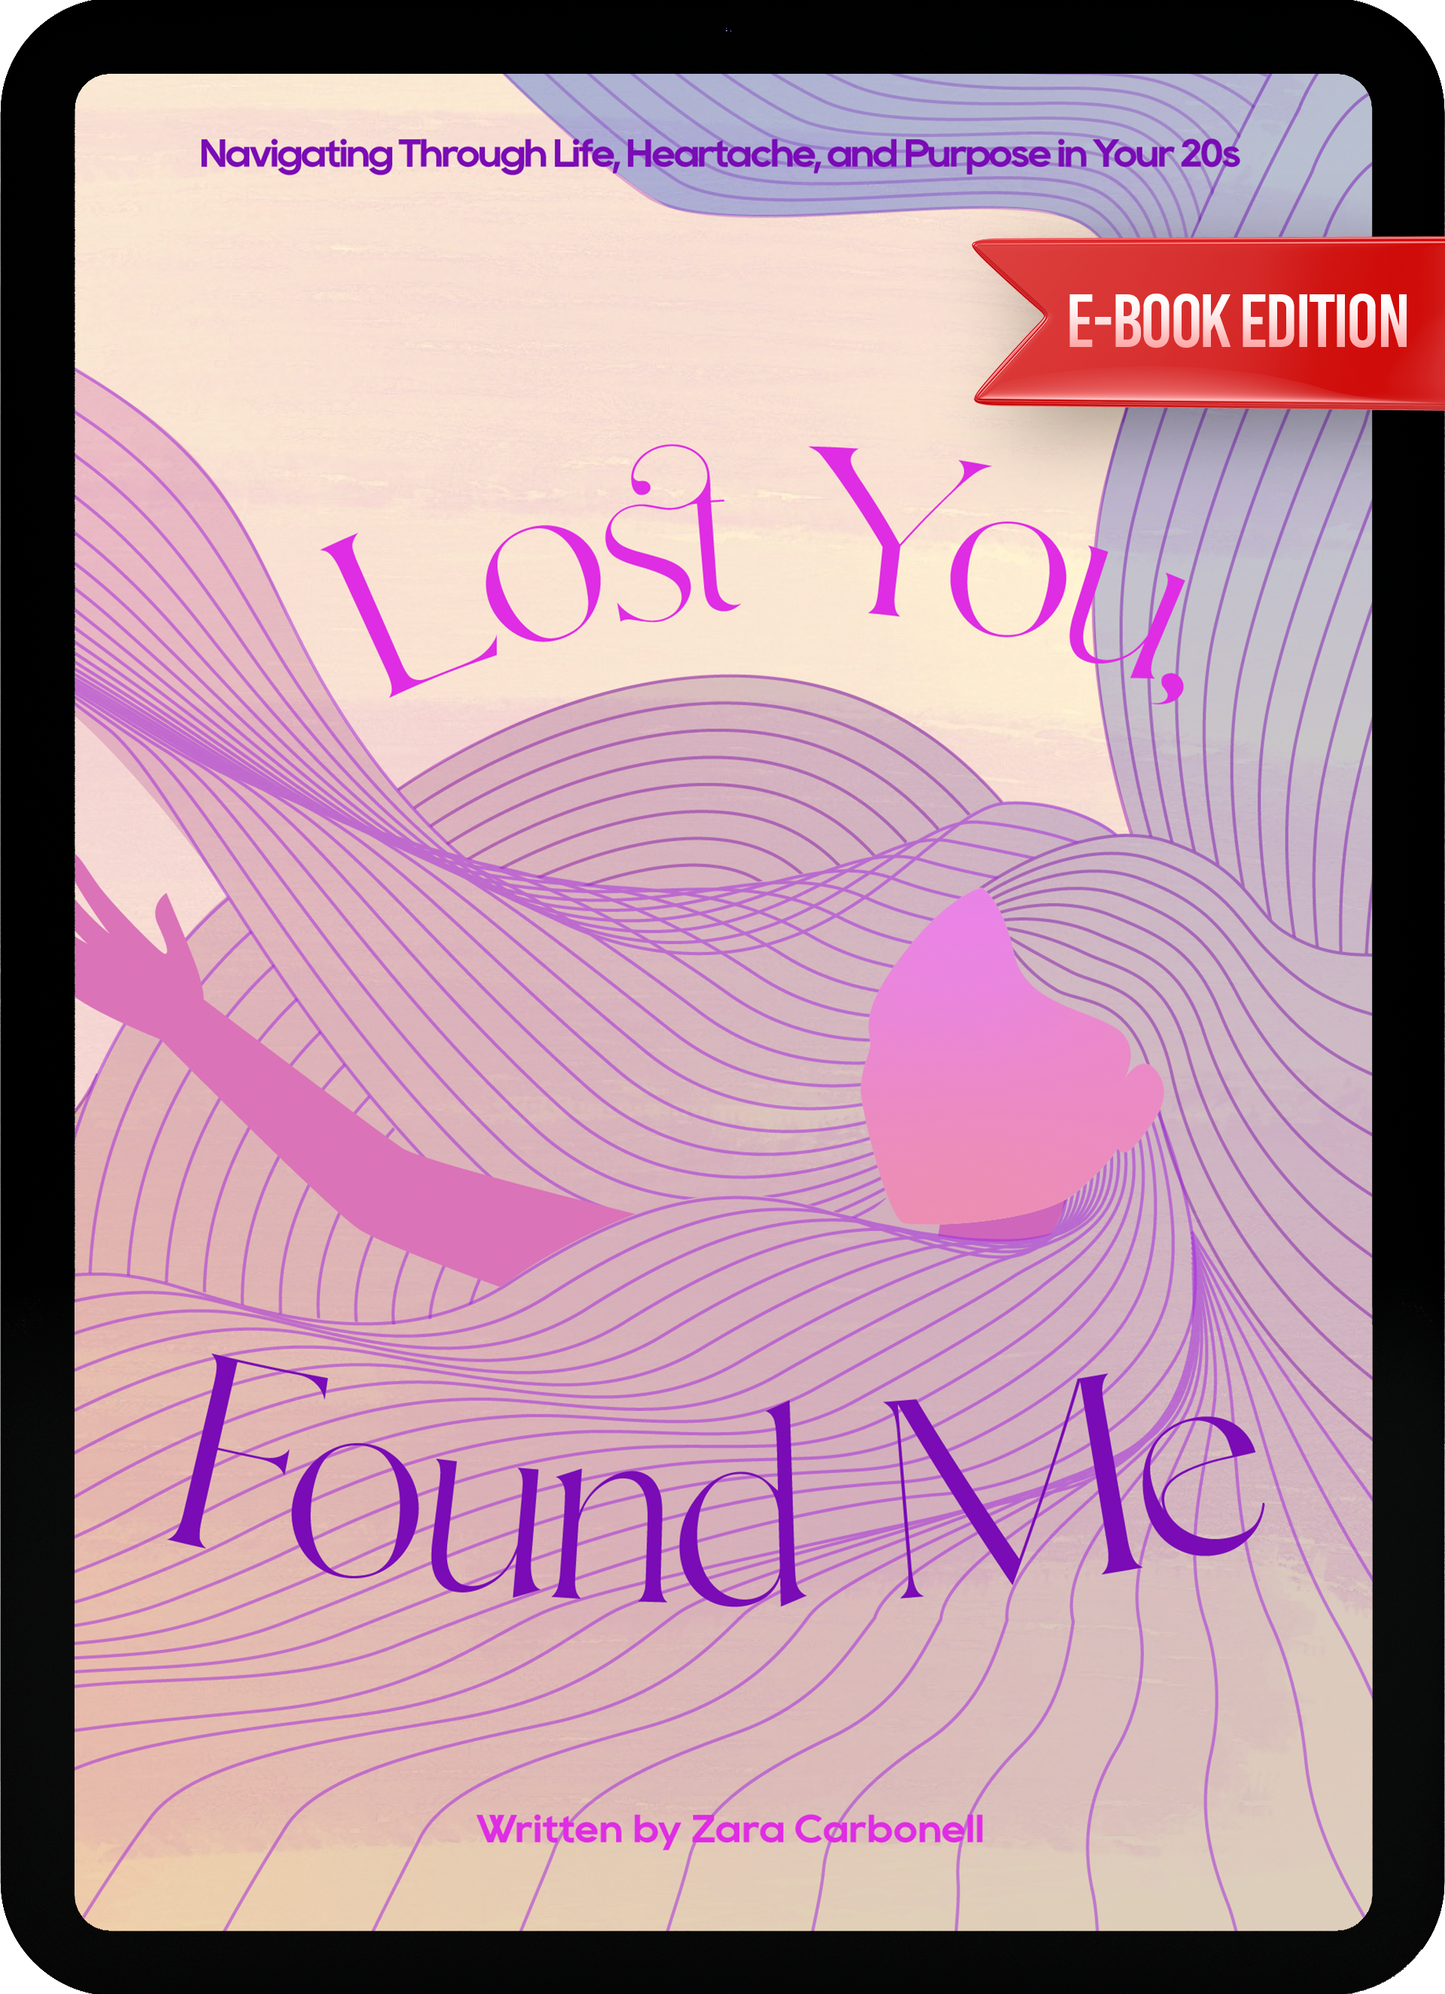 eBook - Lost You, Found Me: Navigating Through Life, Heartache and Purpose in Your 20's